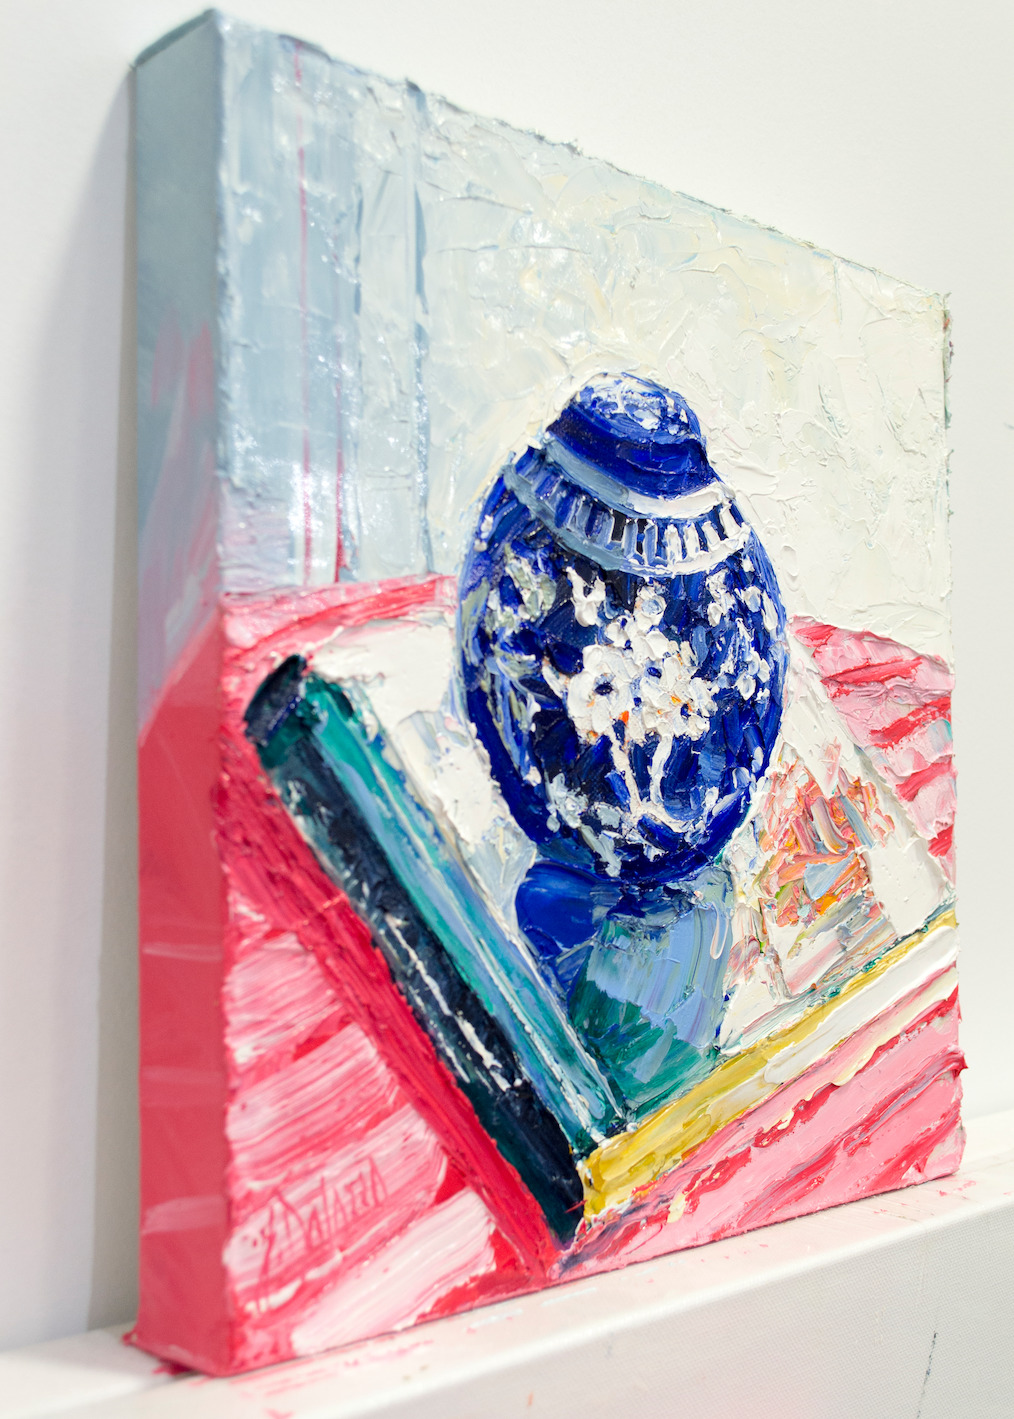 Left View Of Still Life Painting "My Favourite Ginger Jar" By Judith Dalozzo